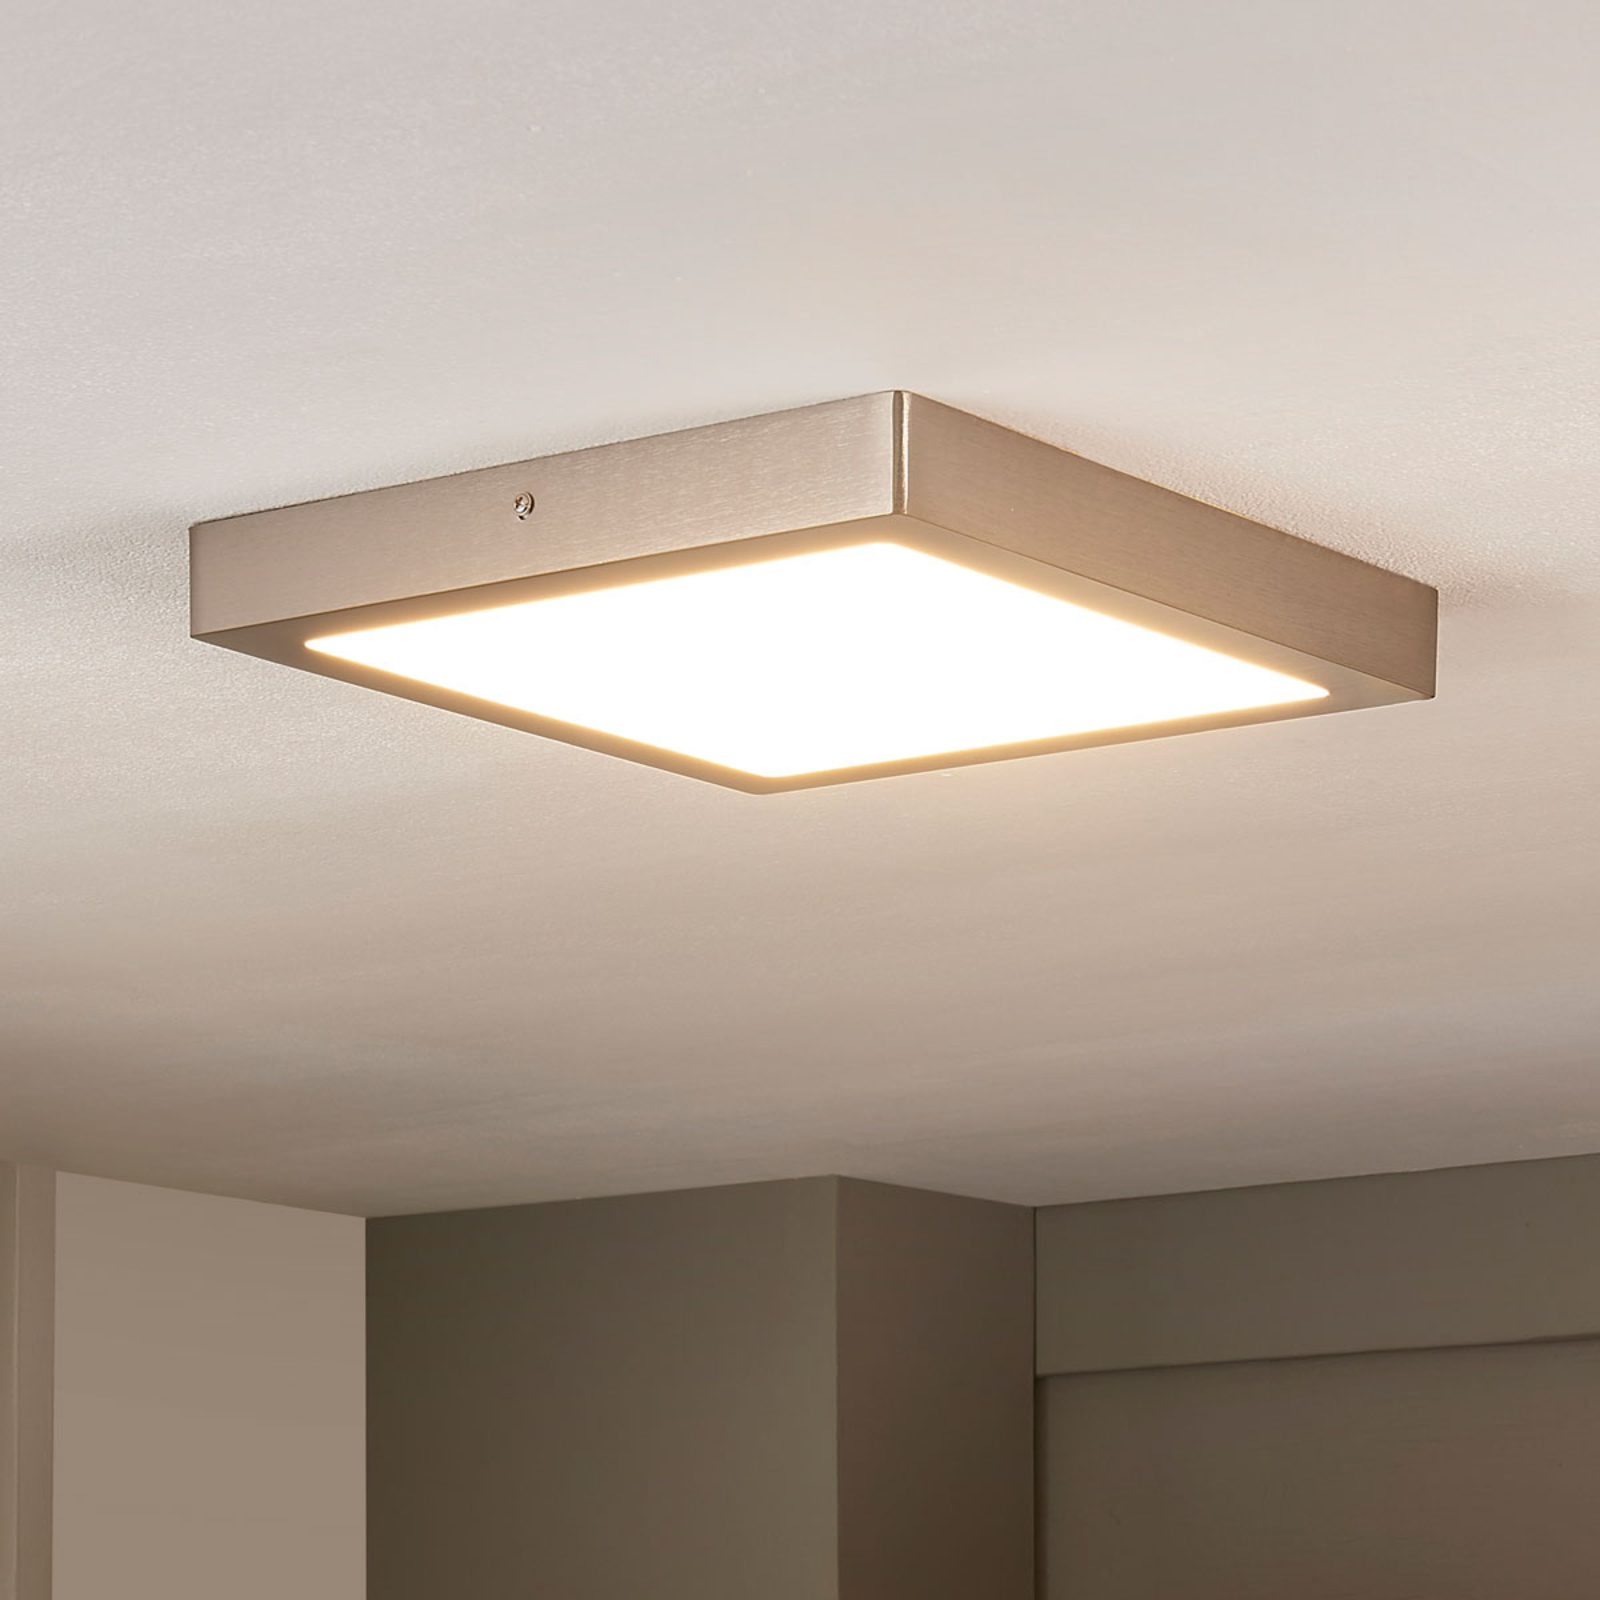 Elice - ceiling light with bright LEDs